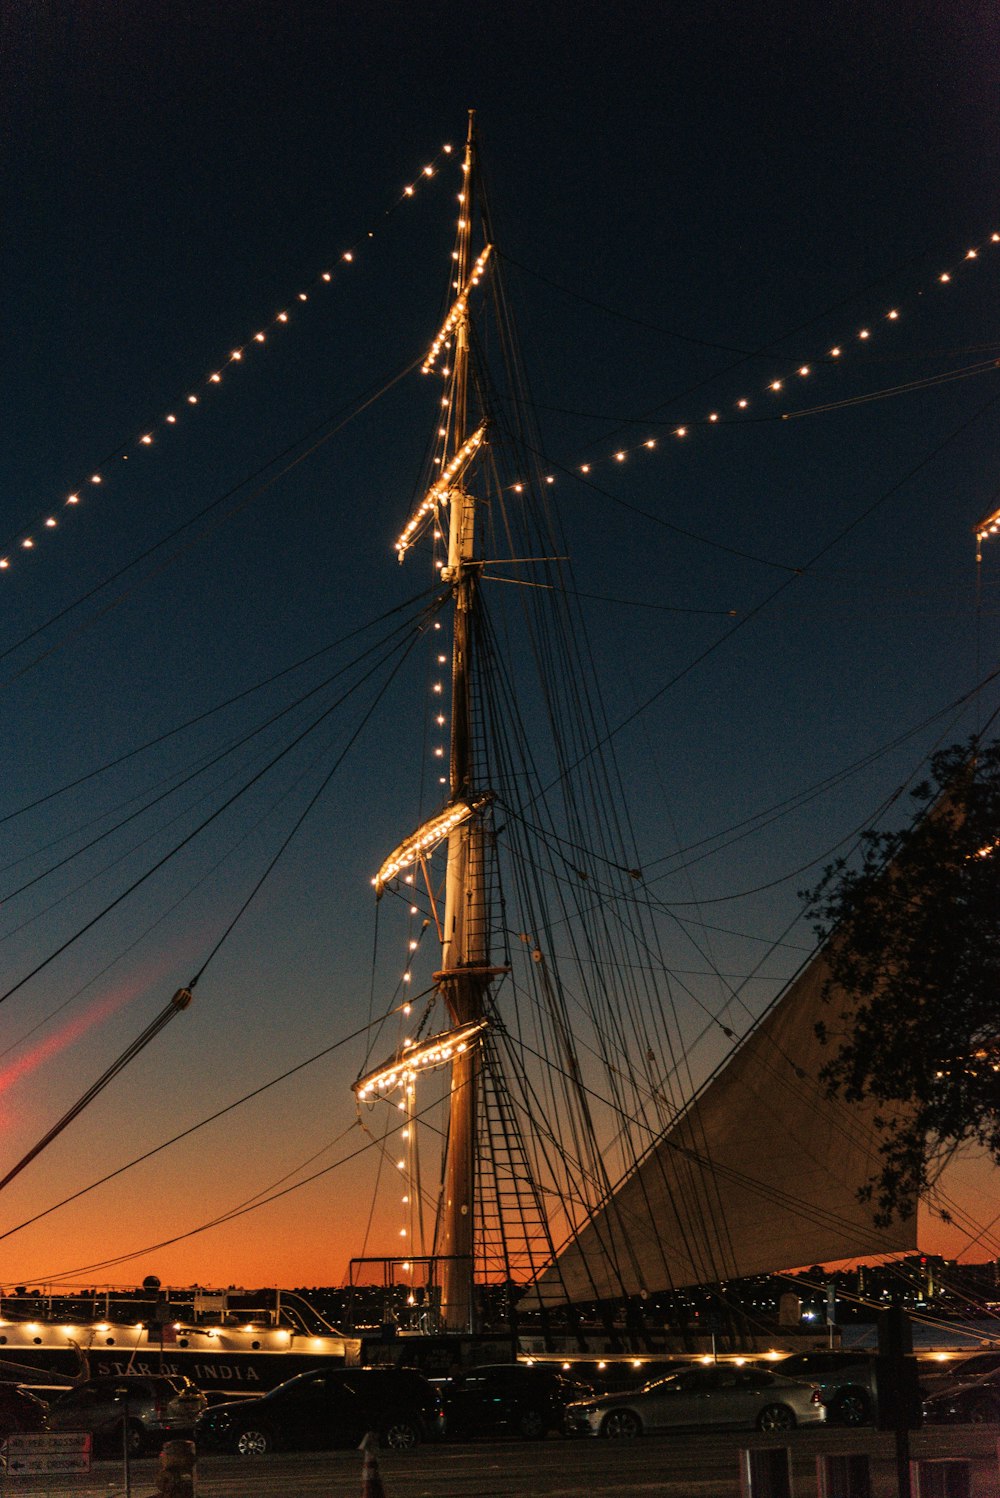 a tall ship is lit up at night